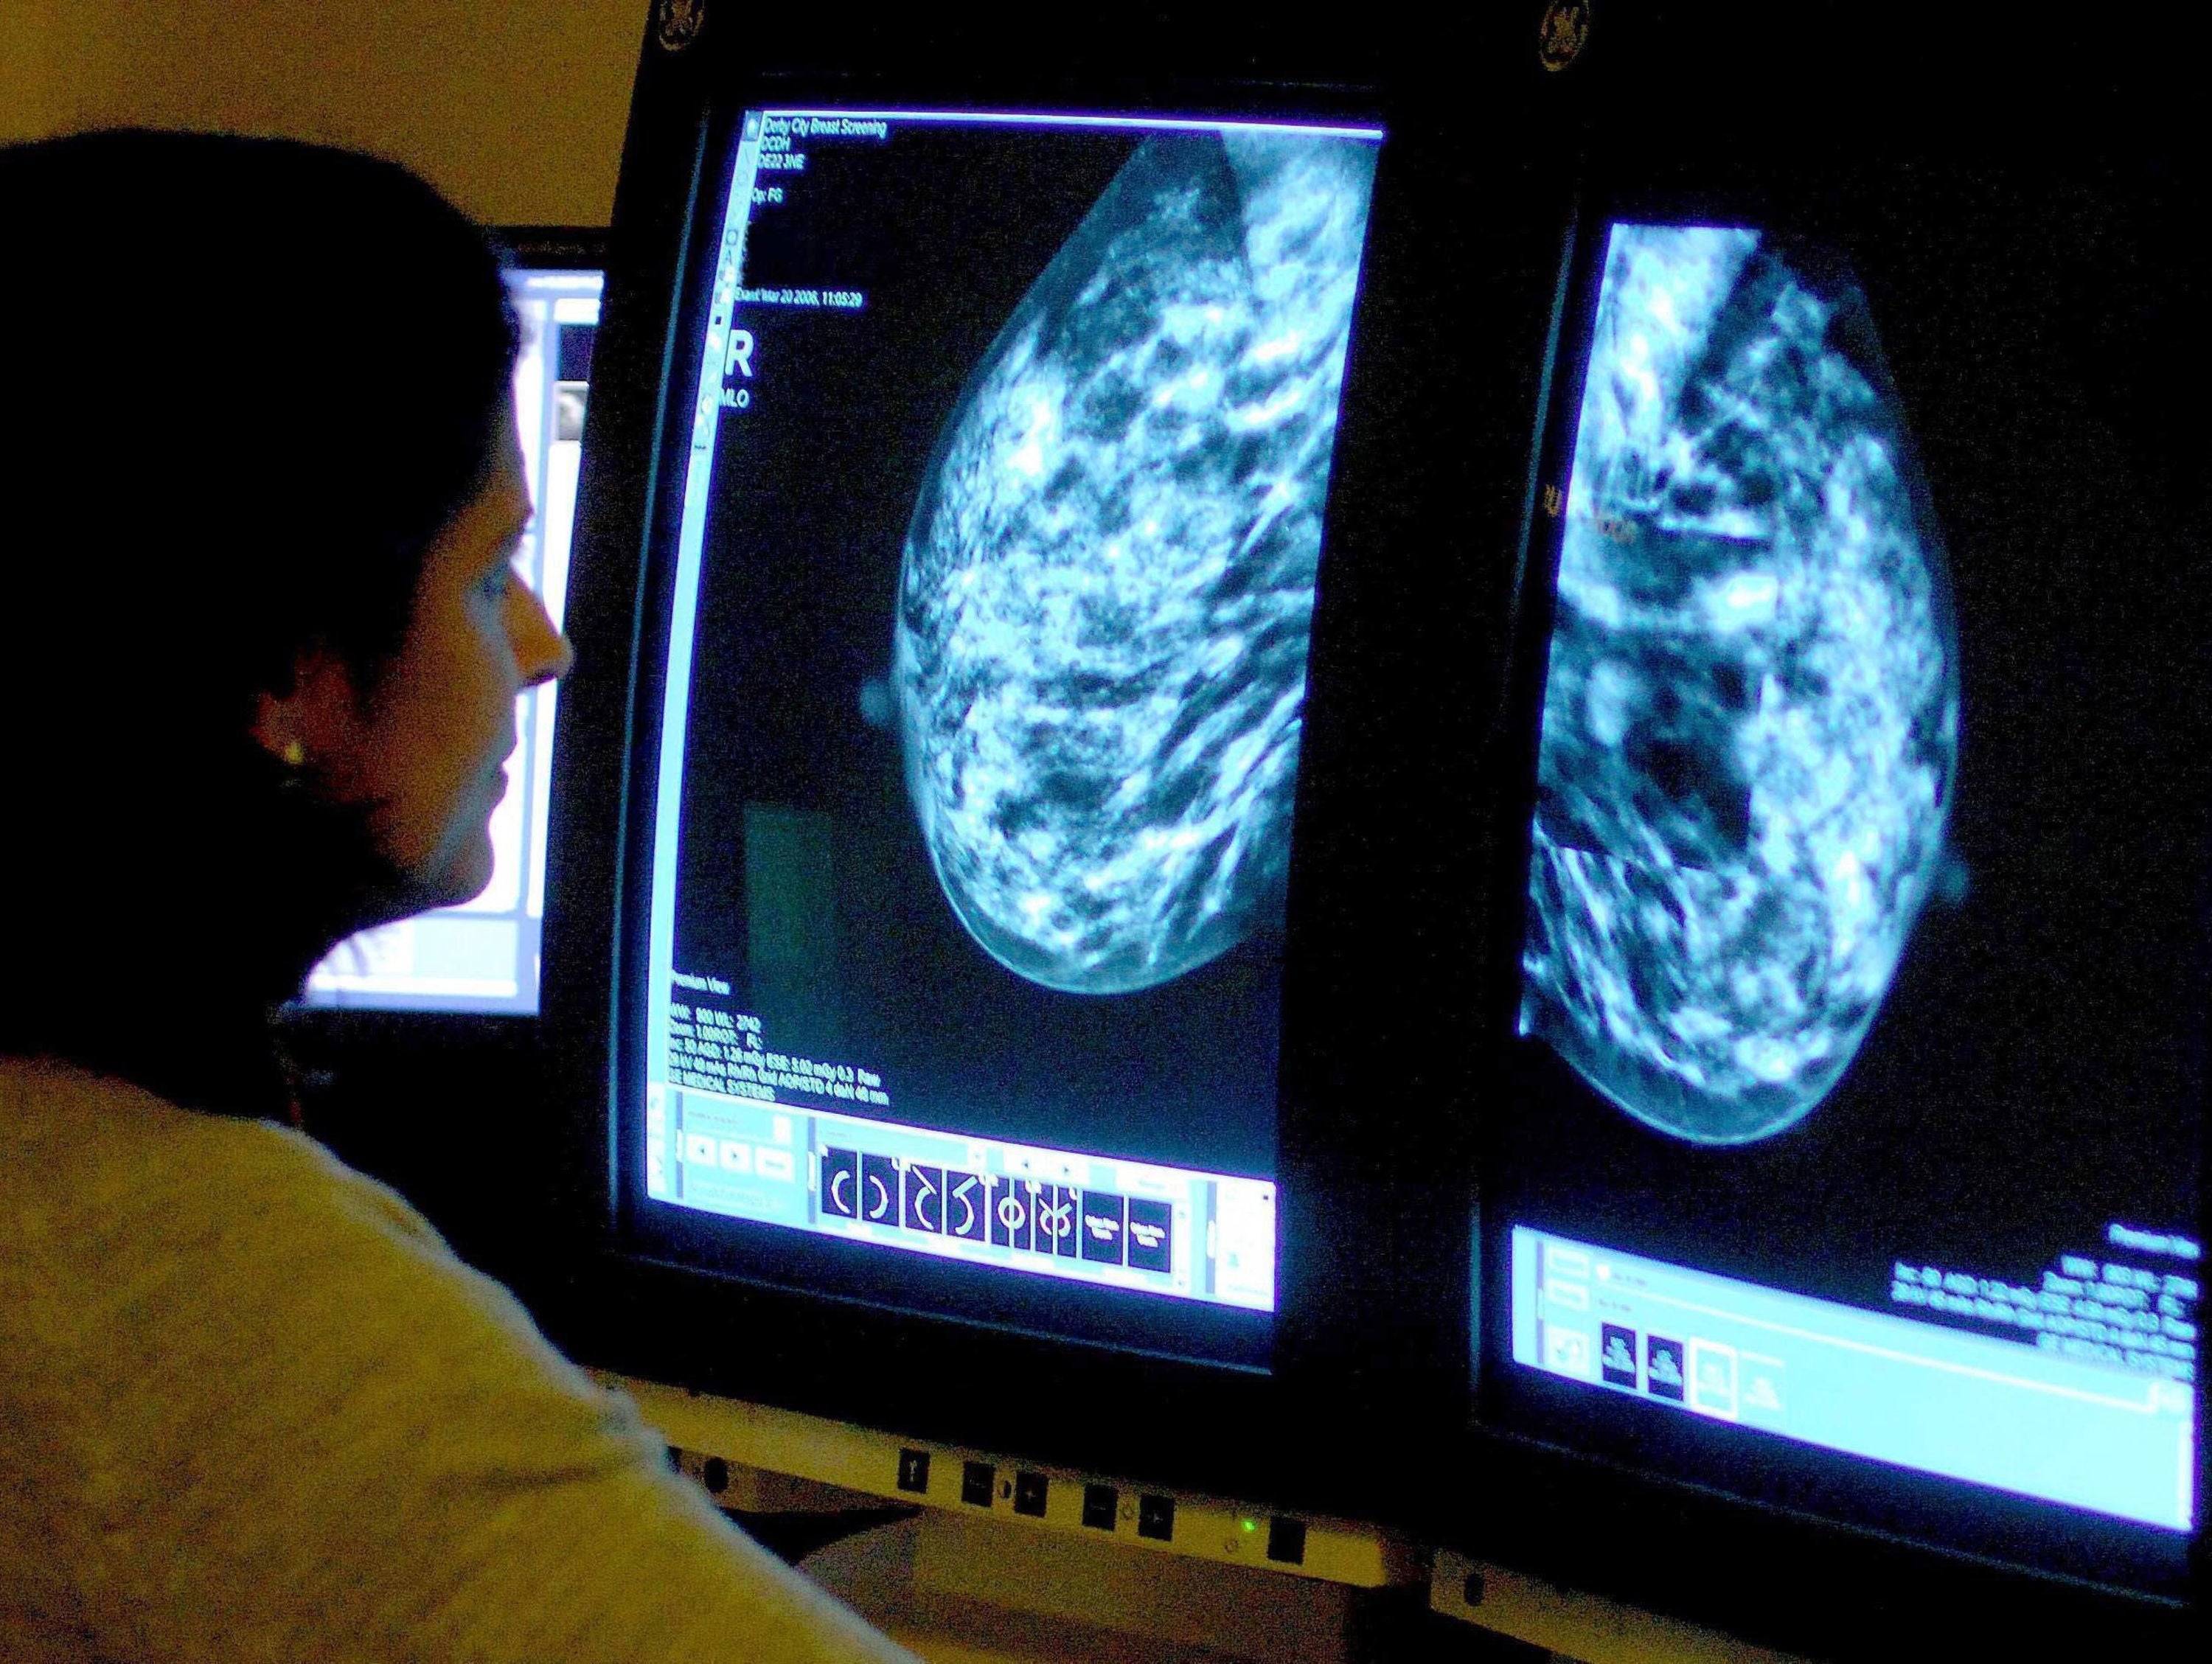 Performance against a key cancer waiting time has fallen, new figures show (Rui Viera/PA)